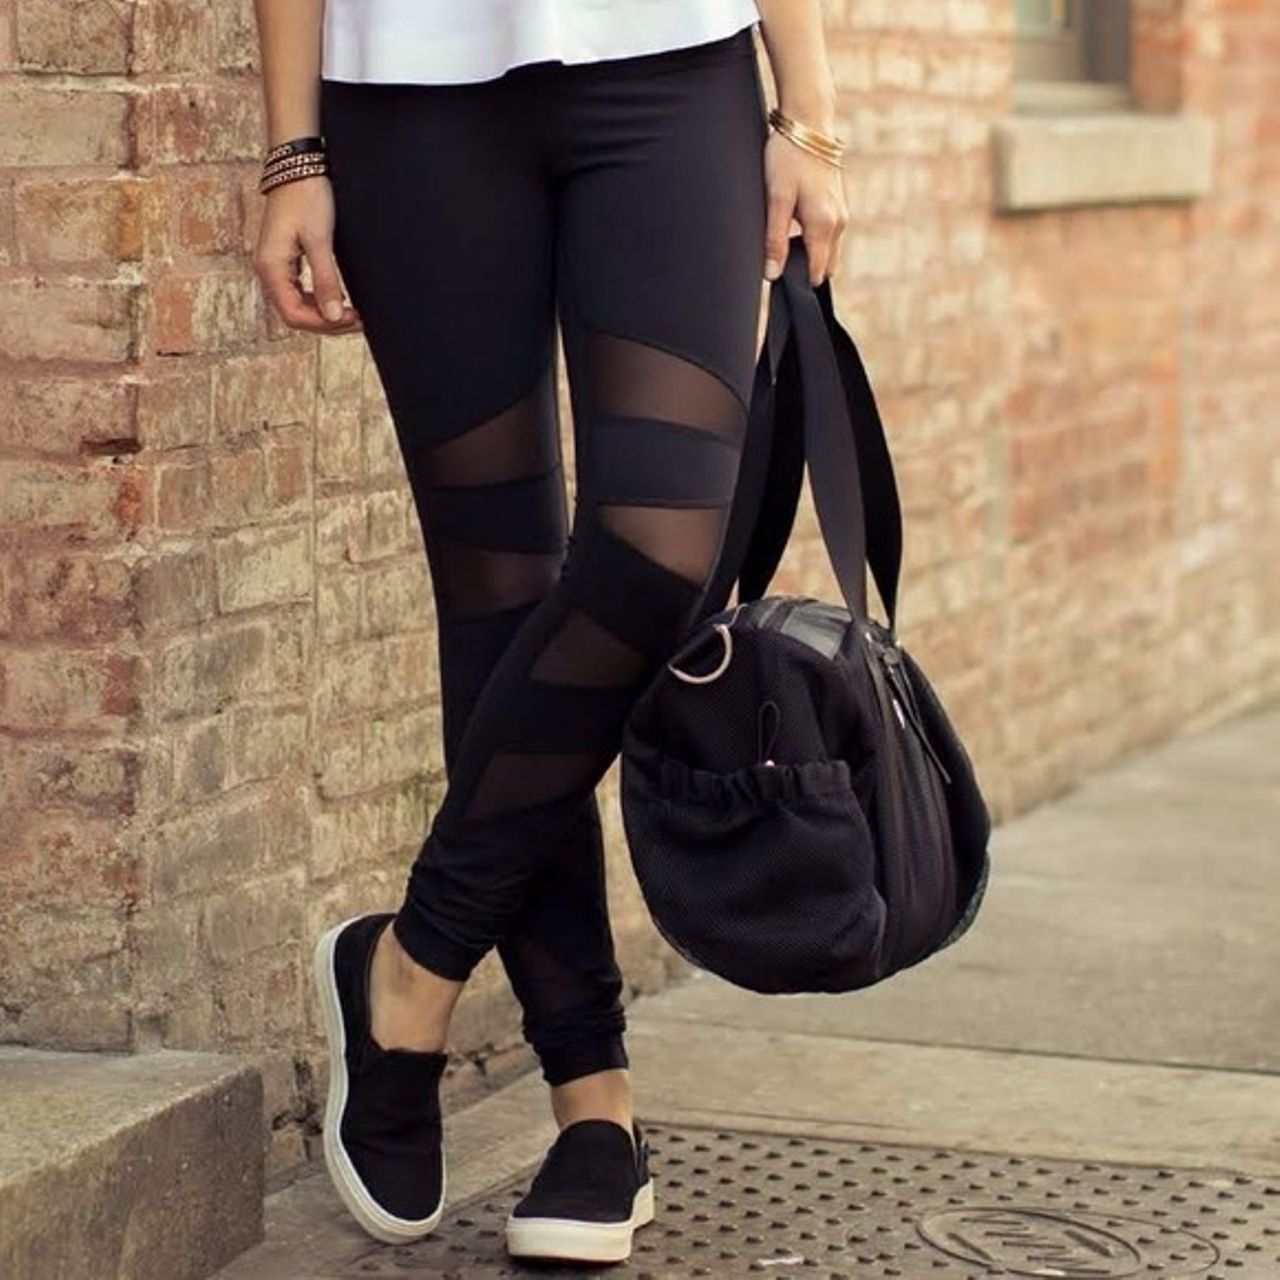 Pattern Lululemon leggings! They have a mesh lining